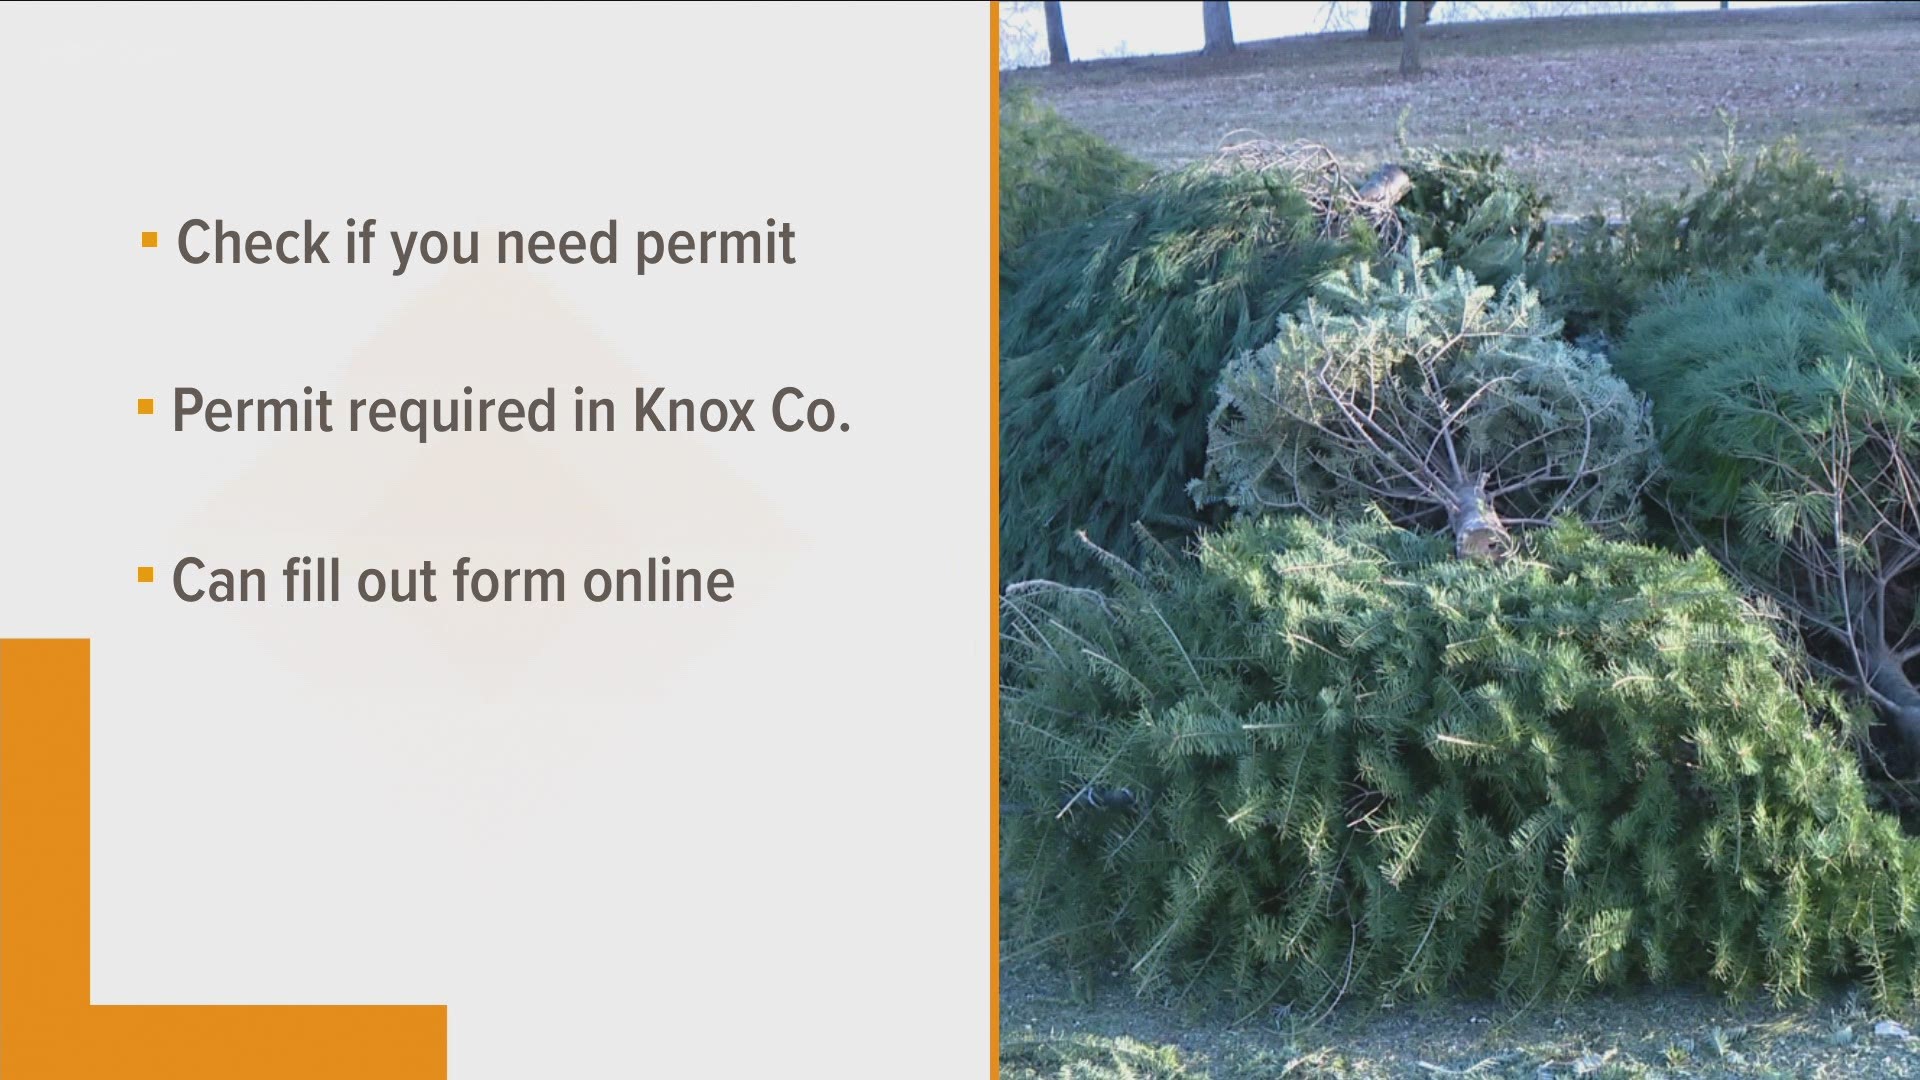 Rural Metro Fire says you can burn your tree, but you need to check your local ordinances to see if you need a permit.